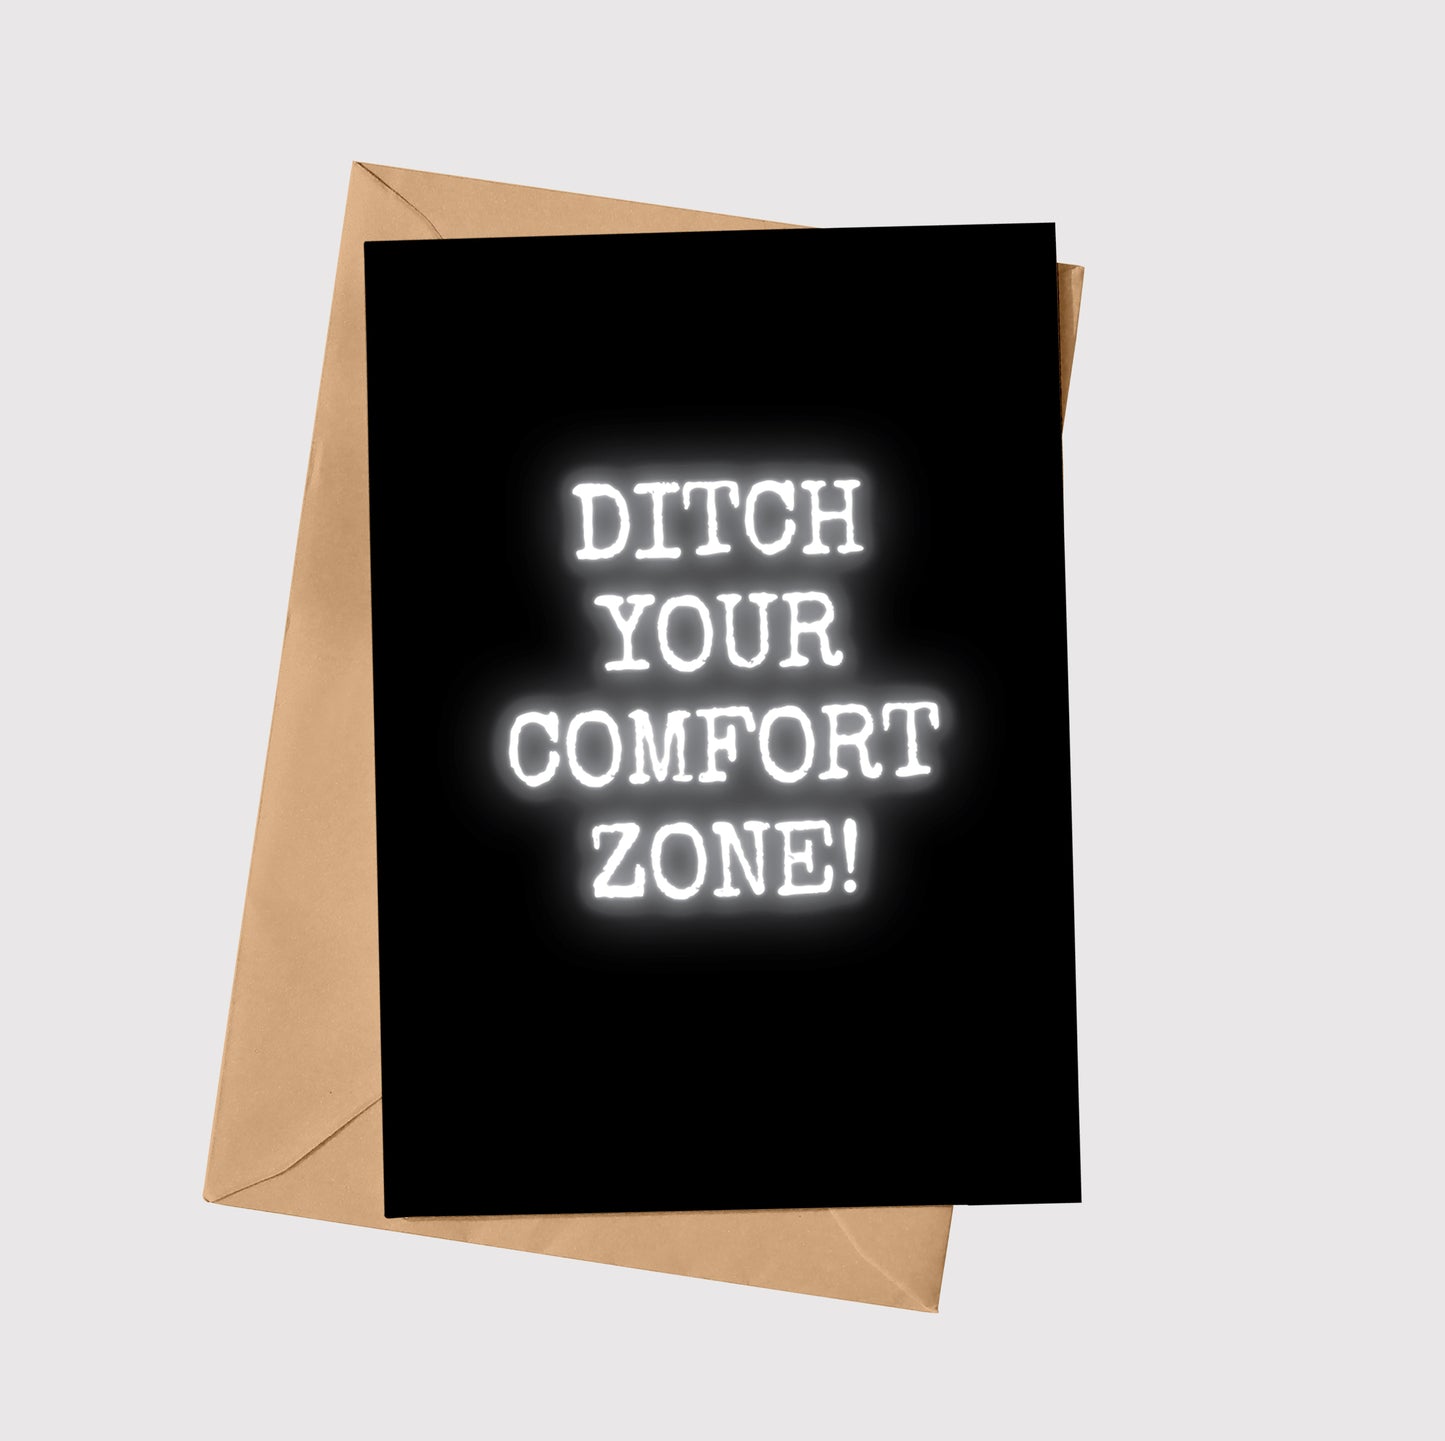 Ditch Your Comfort Zone!